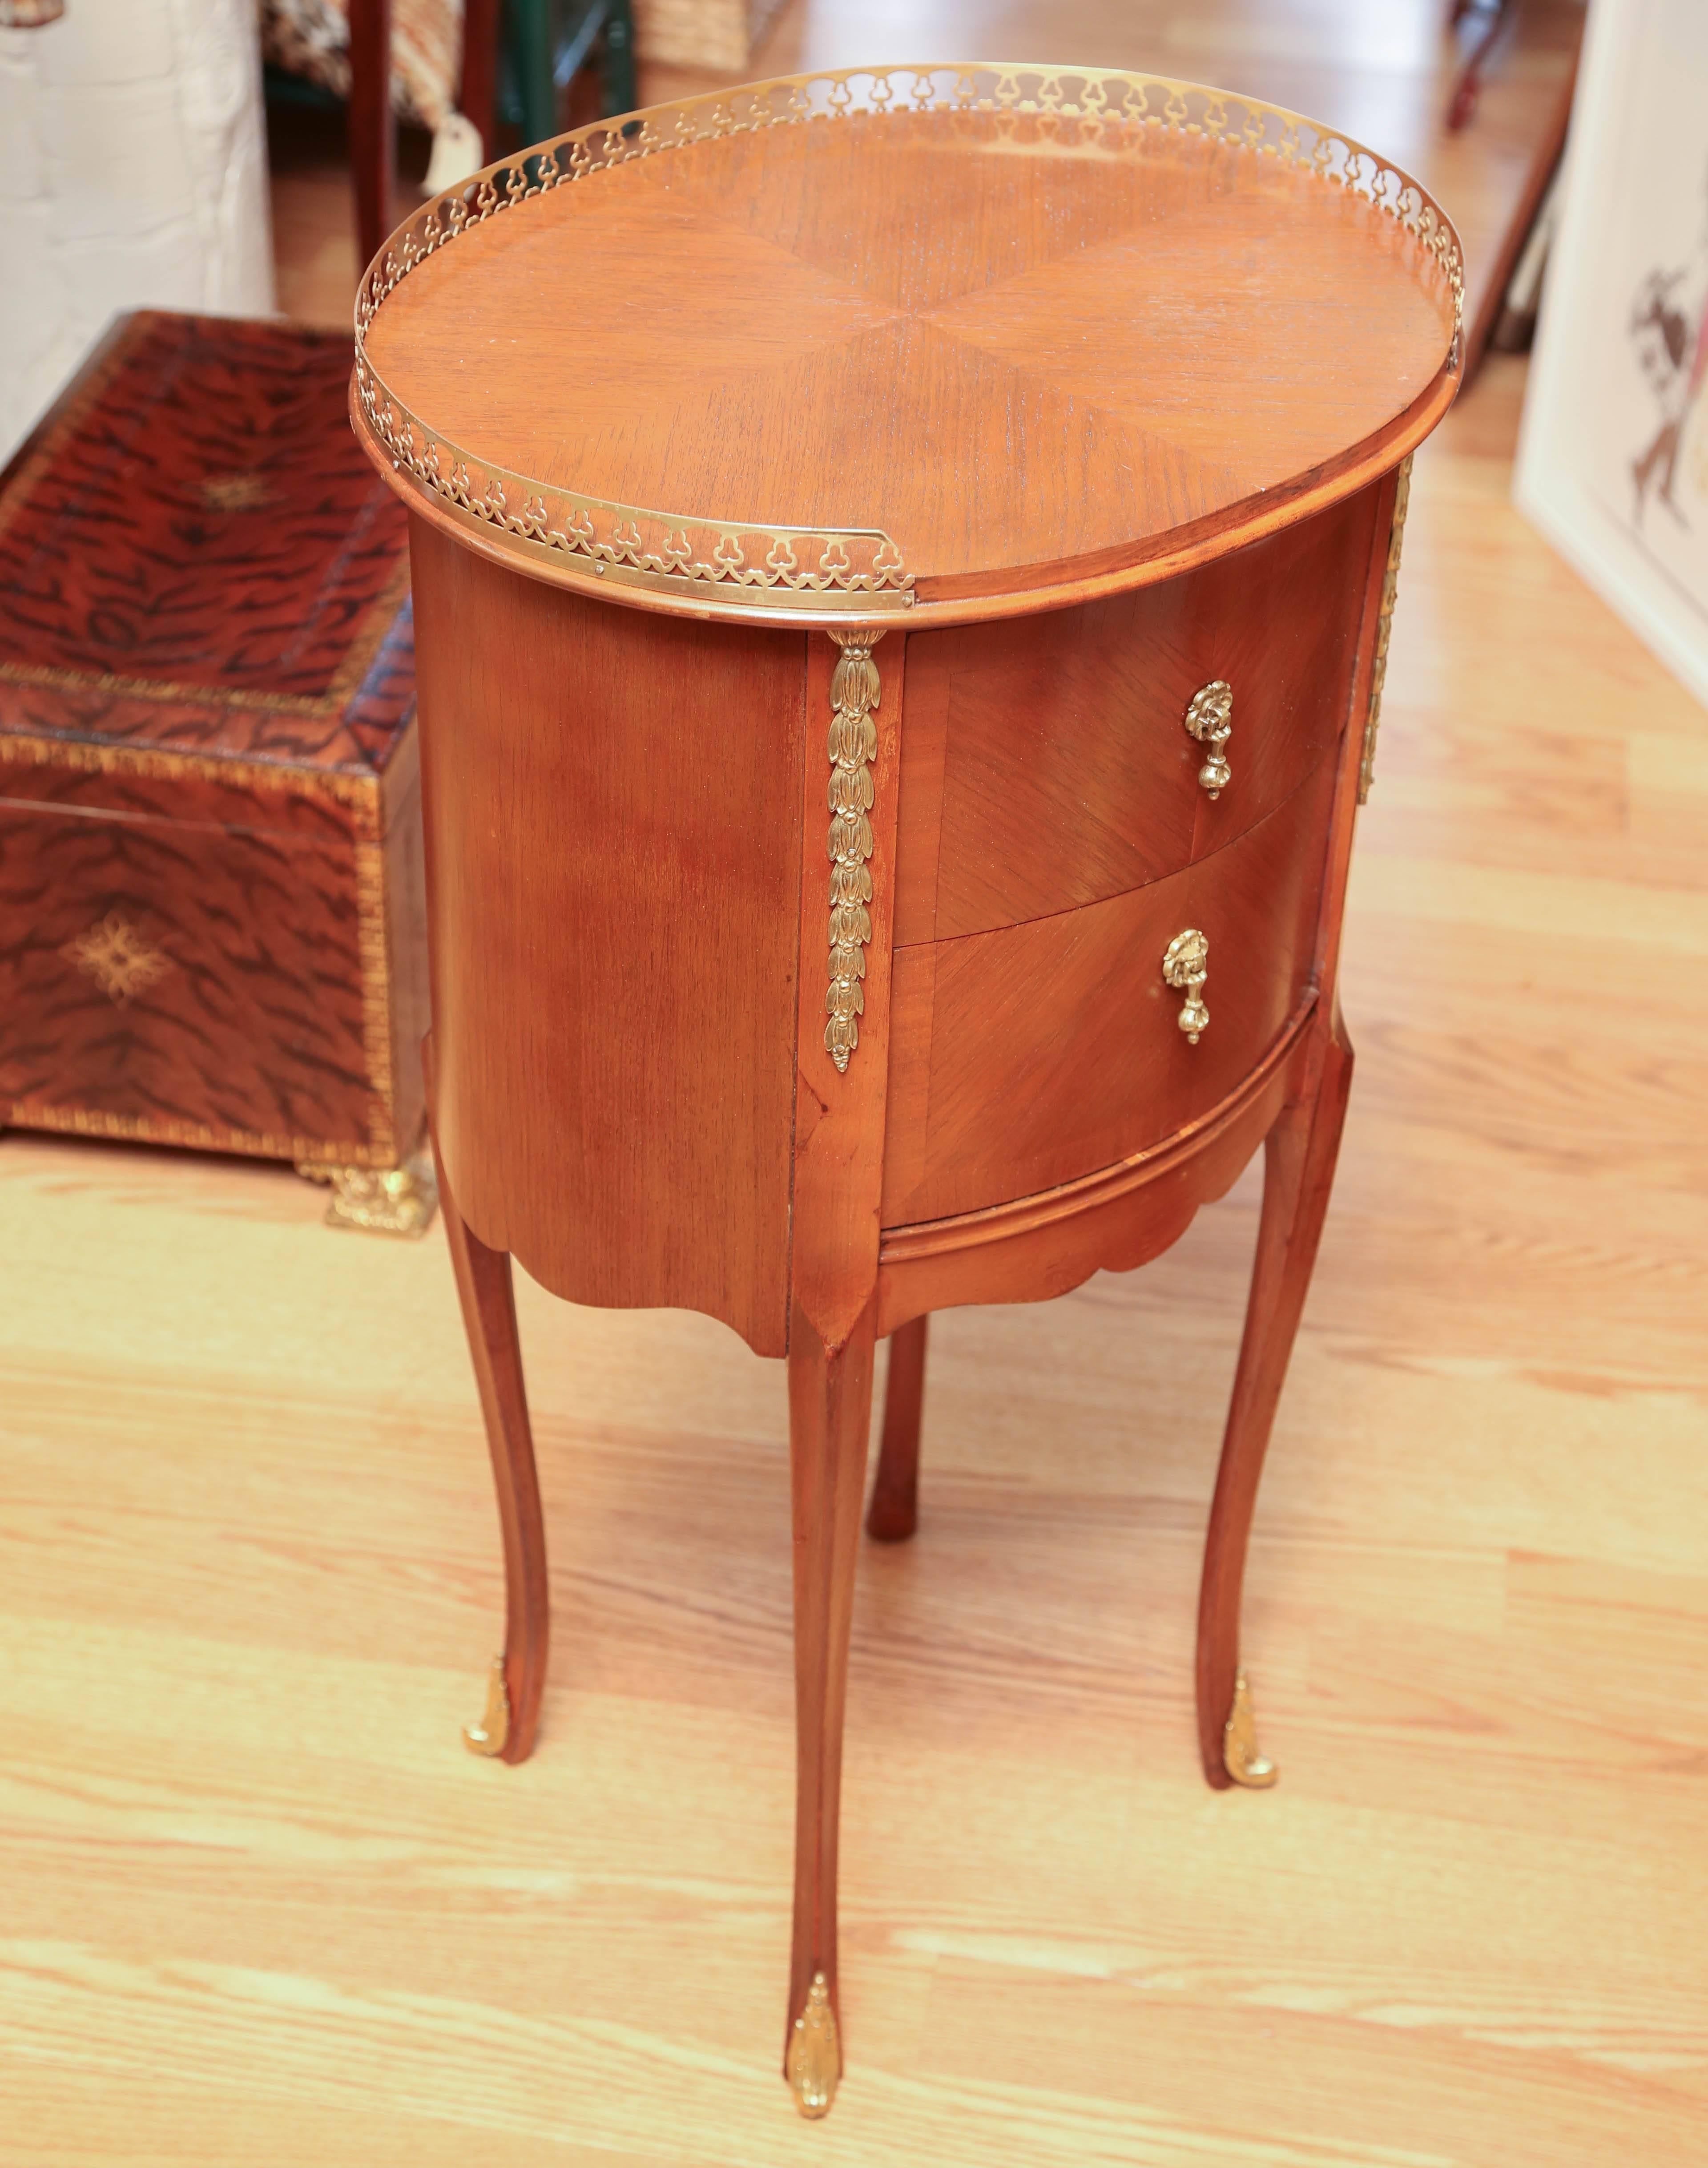 Two drawer oval end table with gallery top by John Stuart.